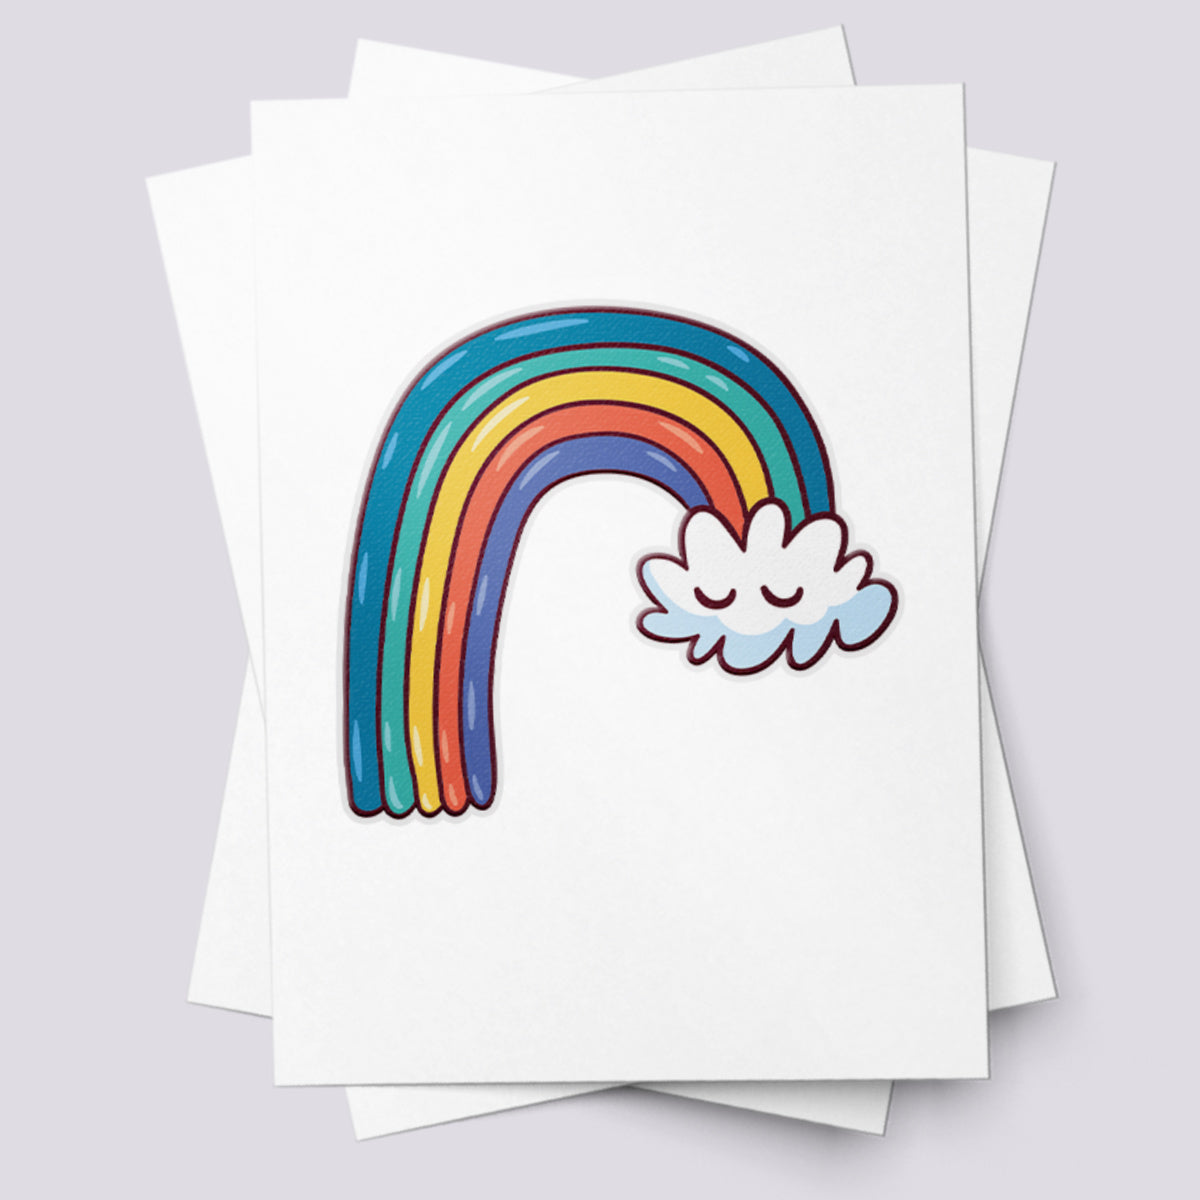 Rainbow and Cloud Temporary Tattoo for Parties